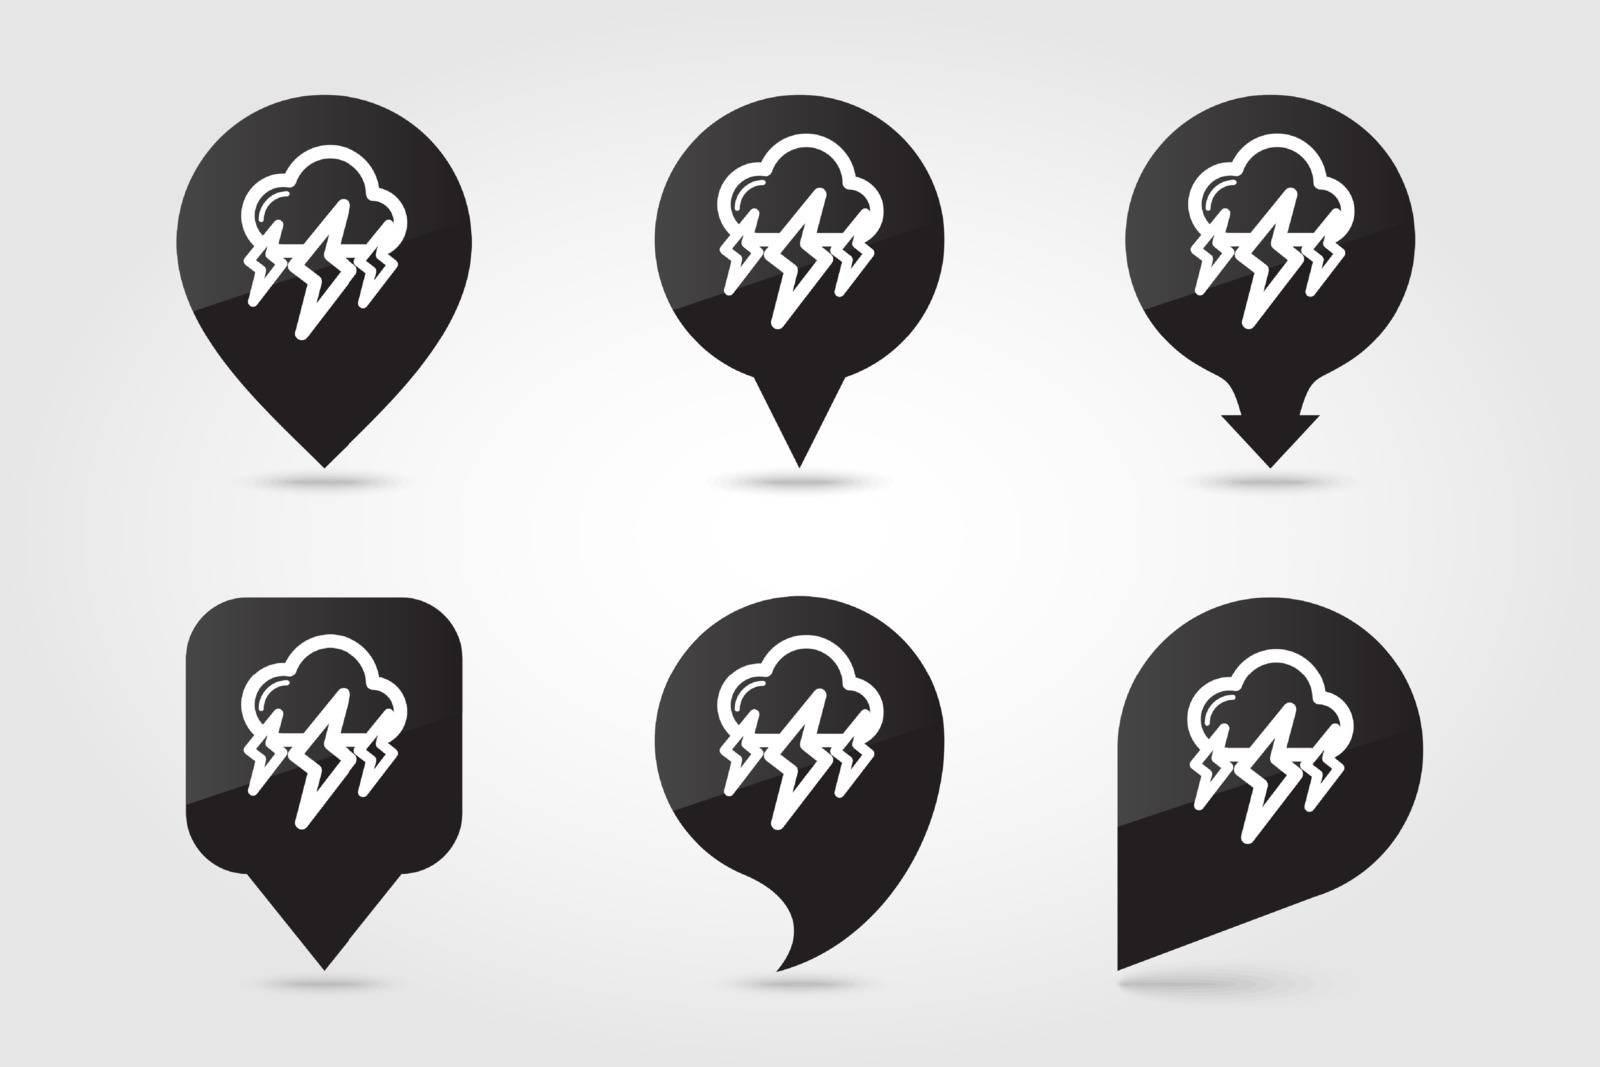 Storm Cloud Lightning outline pin map icon. Map pointer. Map markers. Meteorology. Weather. Vector illustration eps 10